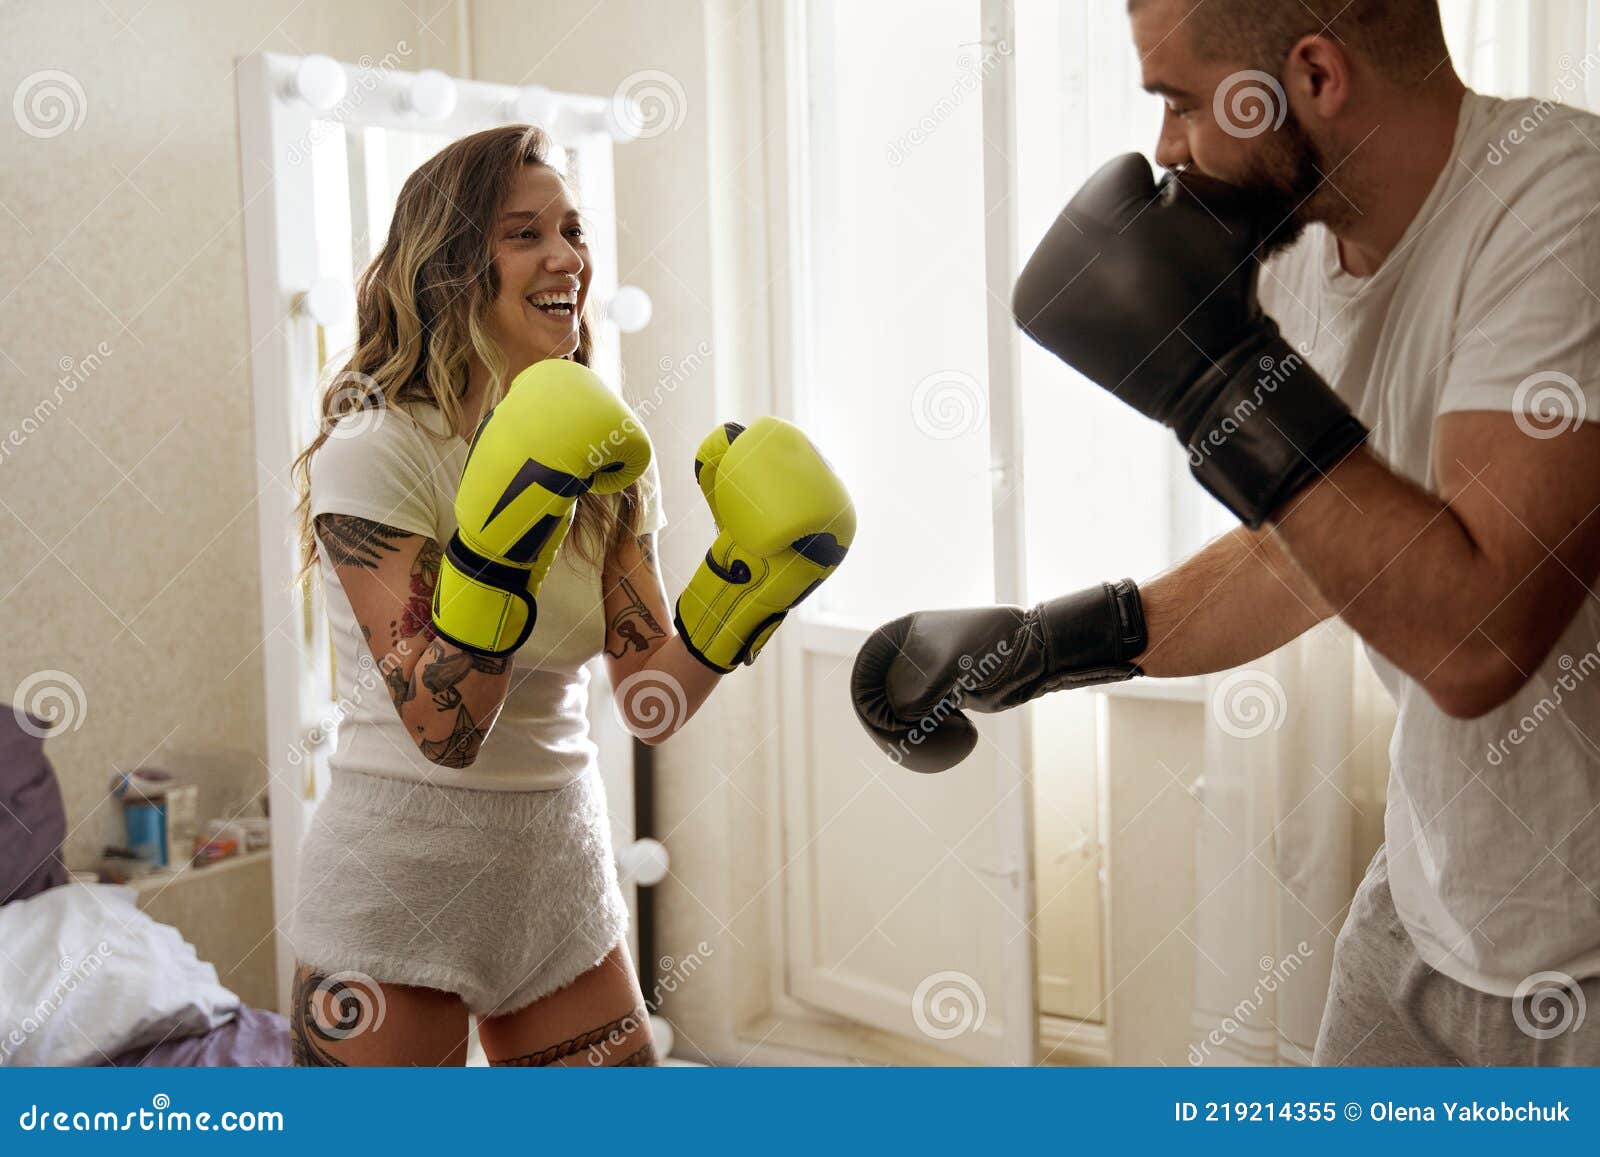 Couple Wearing Gloves Laughing while Having Boxing Training at Home Stock Image